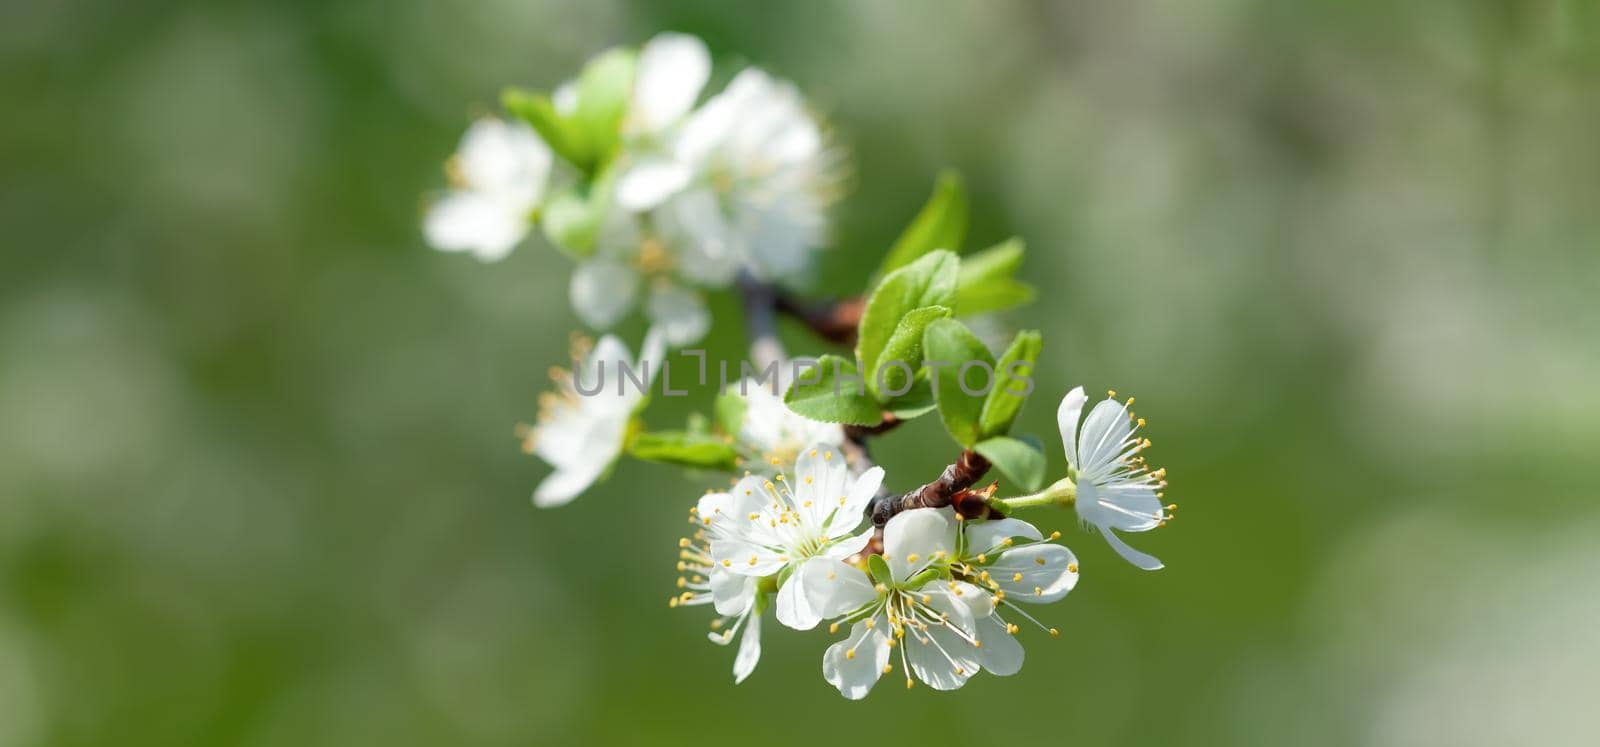 Brunch of blossoming spring tree. Soft image of blossoming tree brunch with white flowers